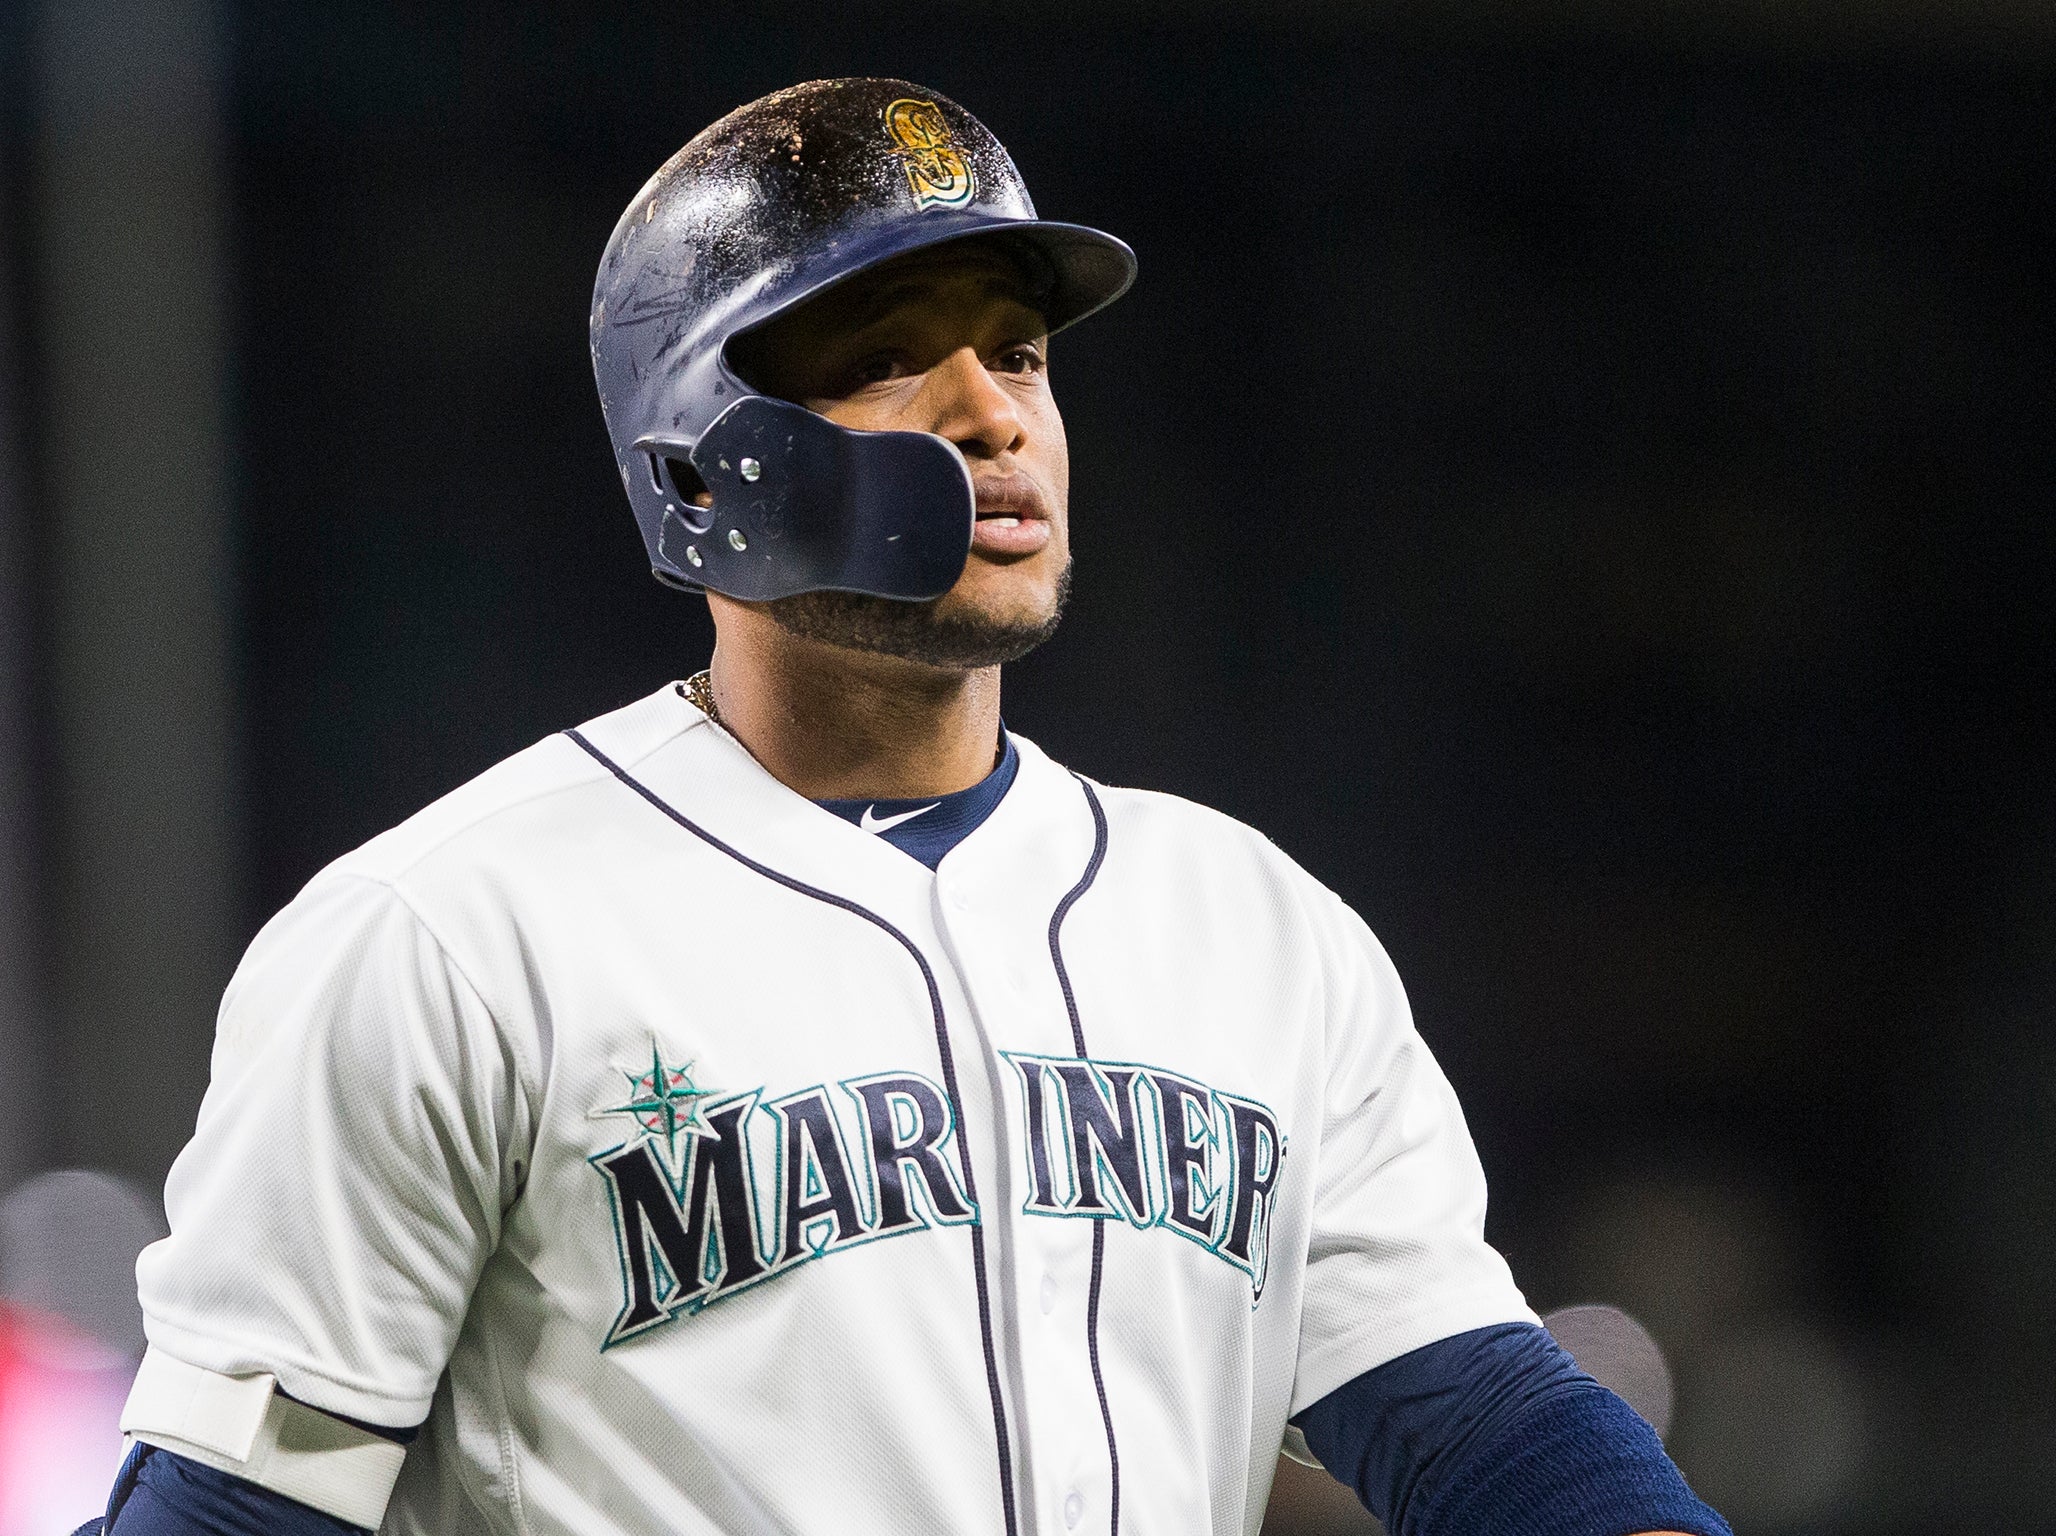 Robinson Cano to have Don't You Know on jersey